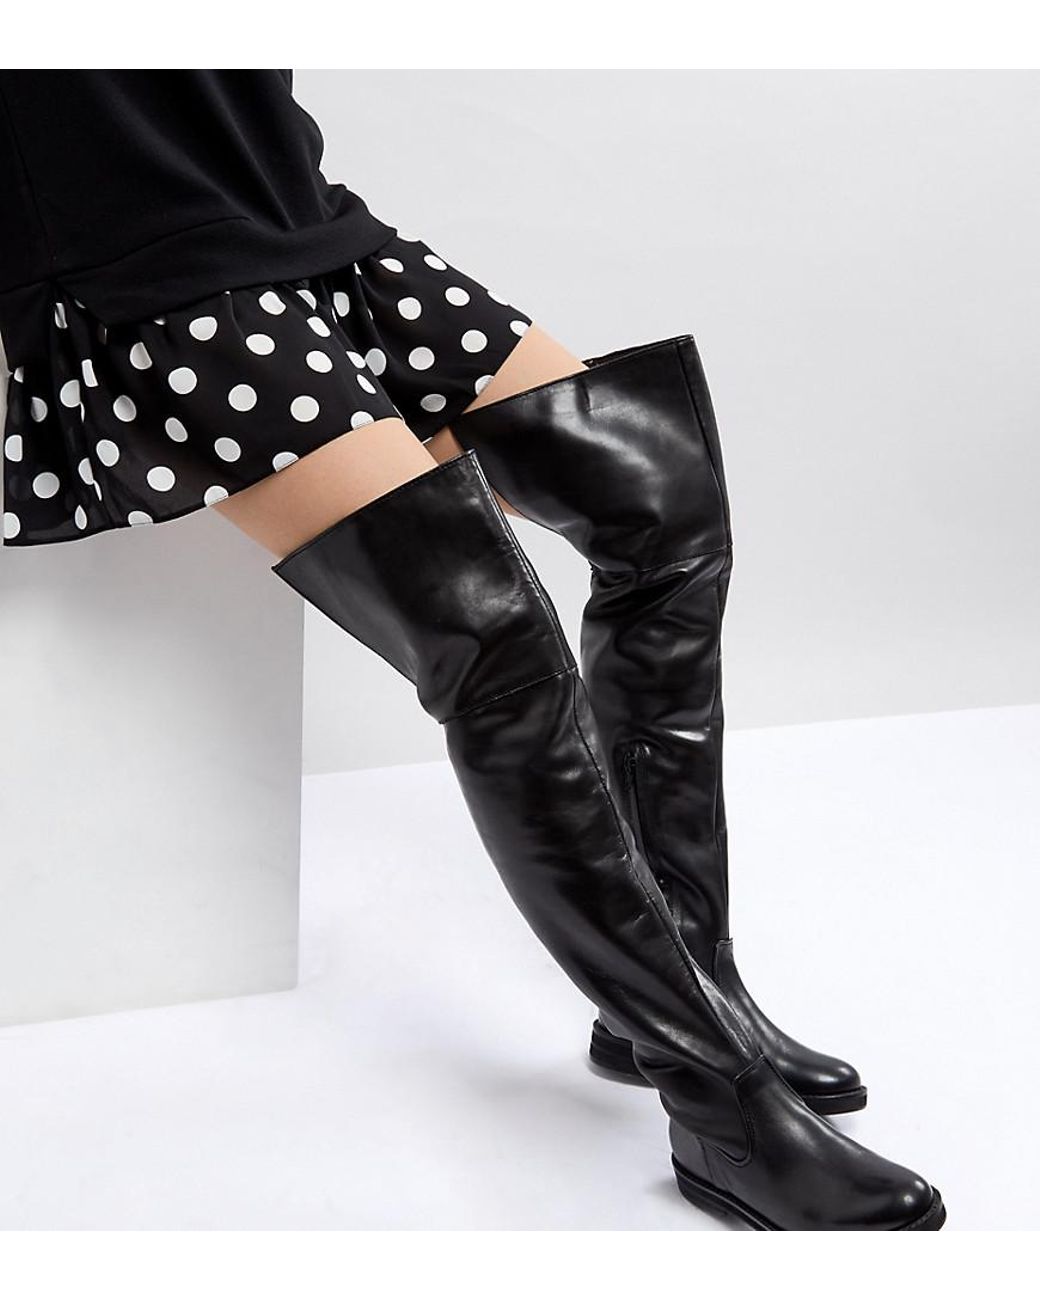 Mango Leather Flat Knee High Boot in Black | Lyst